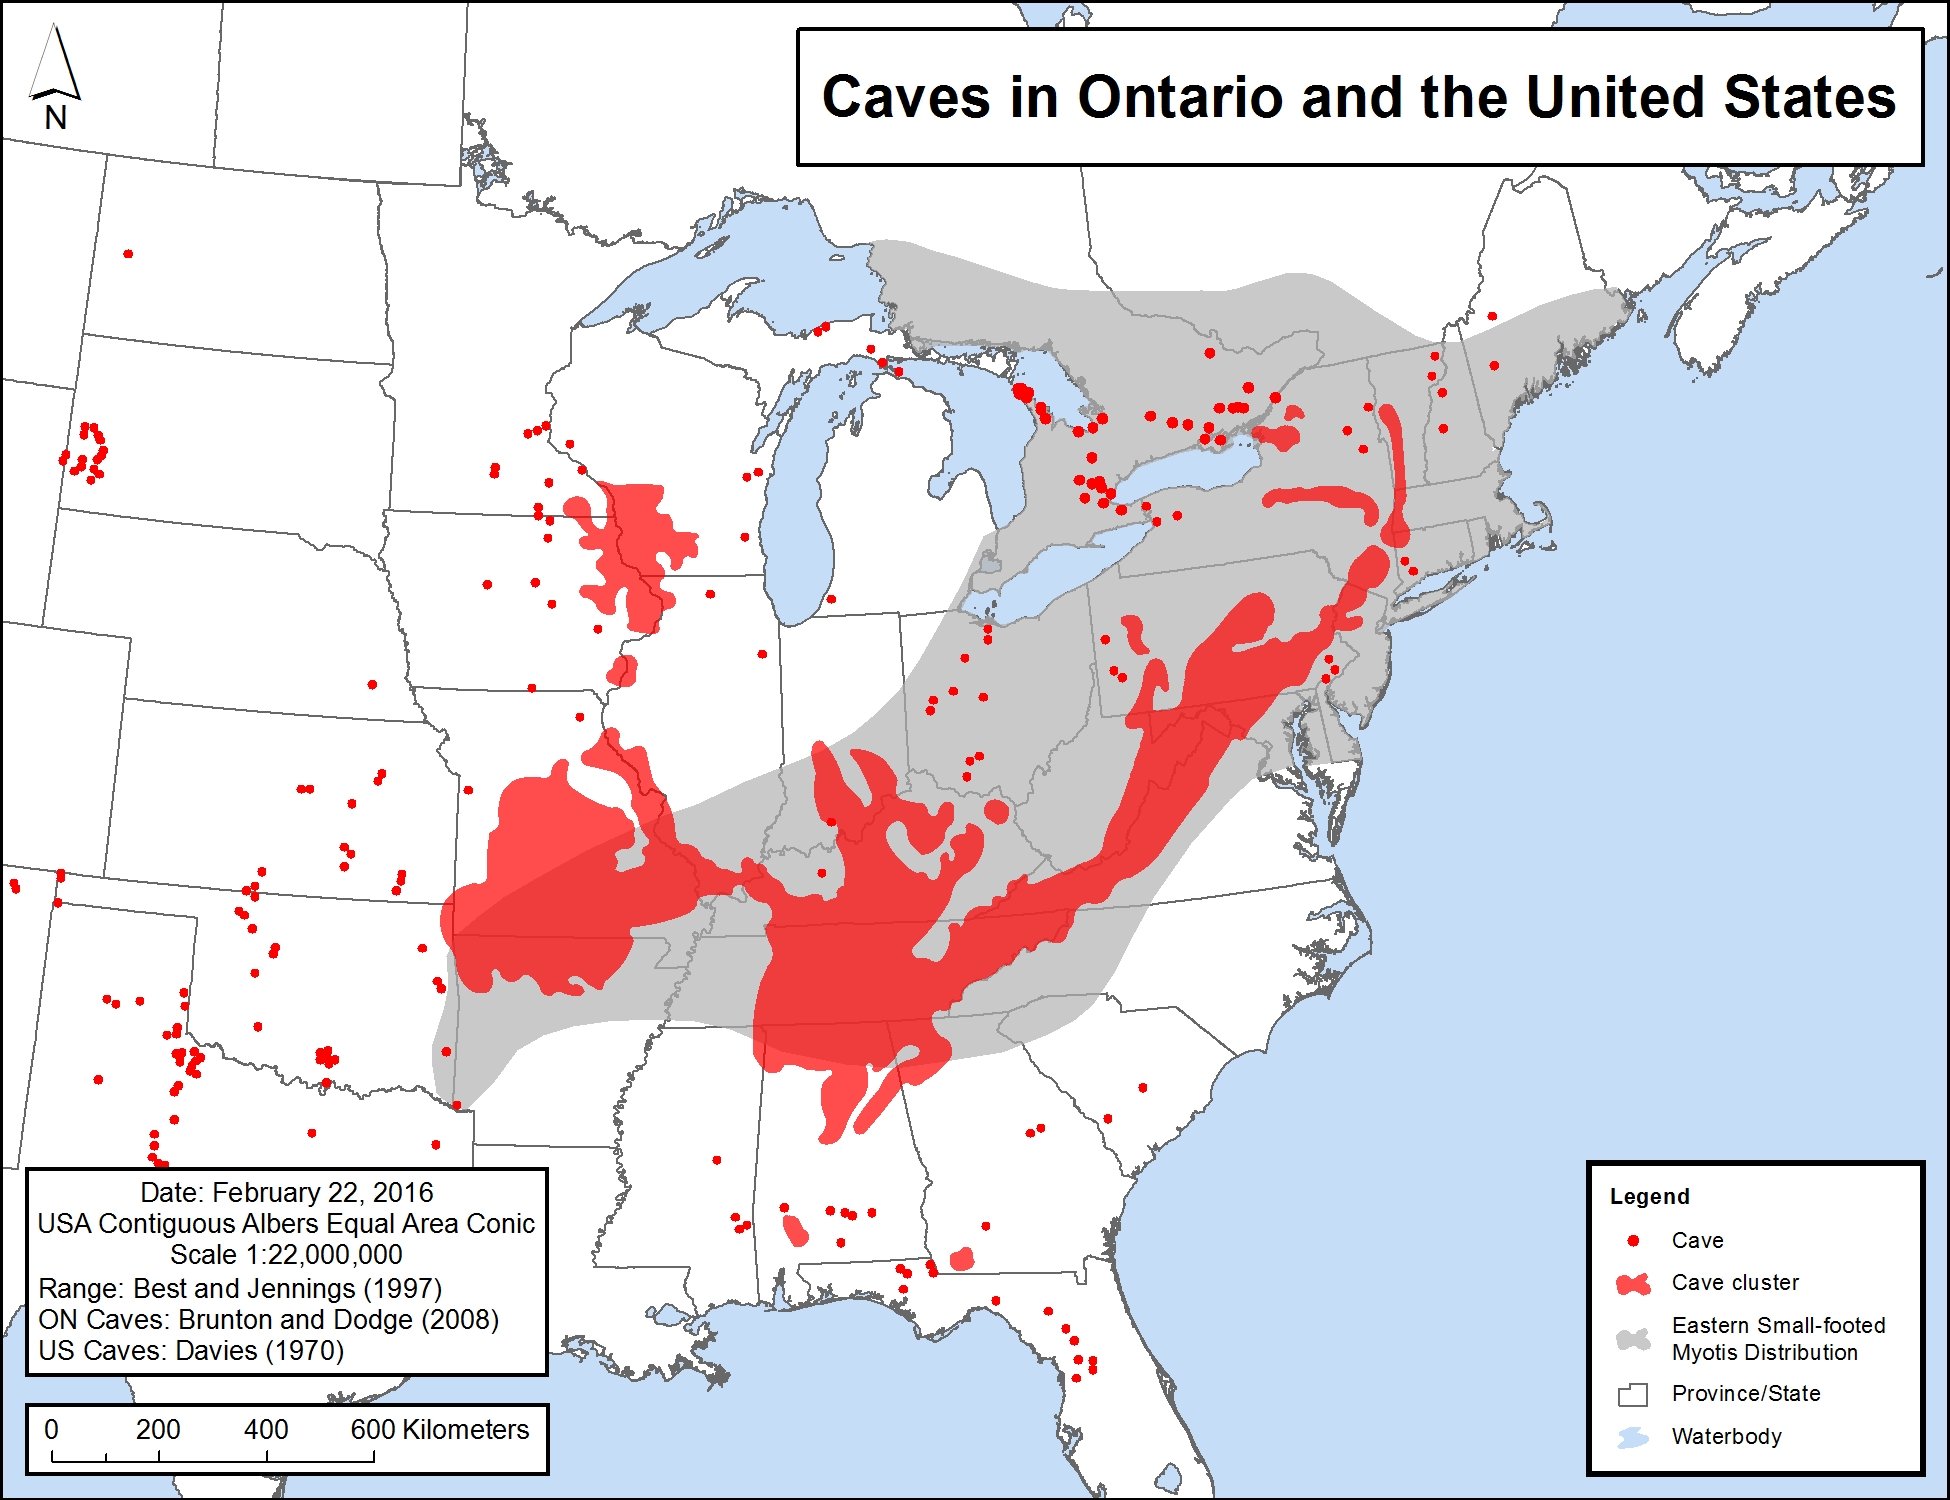 Map of caves and cave clusters, overlaid on the range map of Eastern Small-footed Myotis in North America. Broad cave clusters overlap with the Eastern Small-footed Myotis' range across much of the U.S.A. A number of limestone caves are shown within the species' Ontario range.